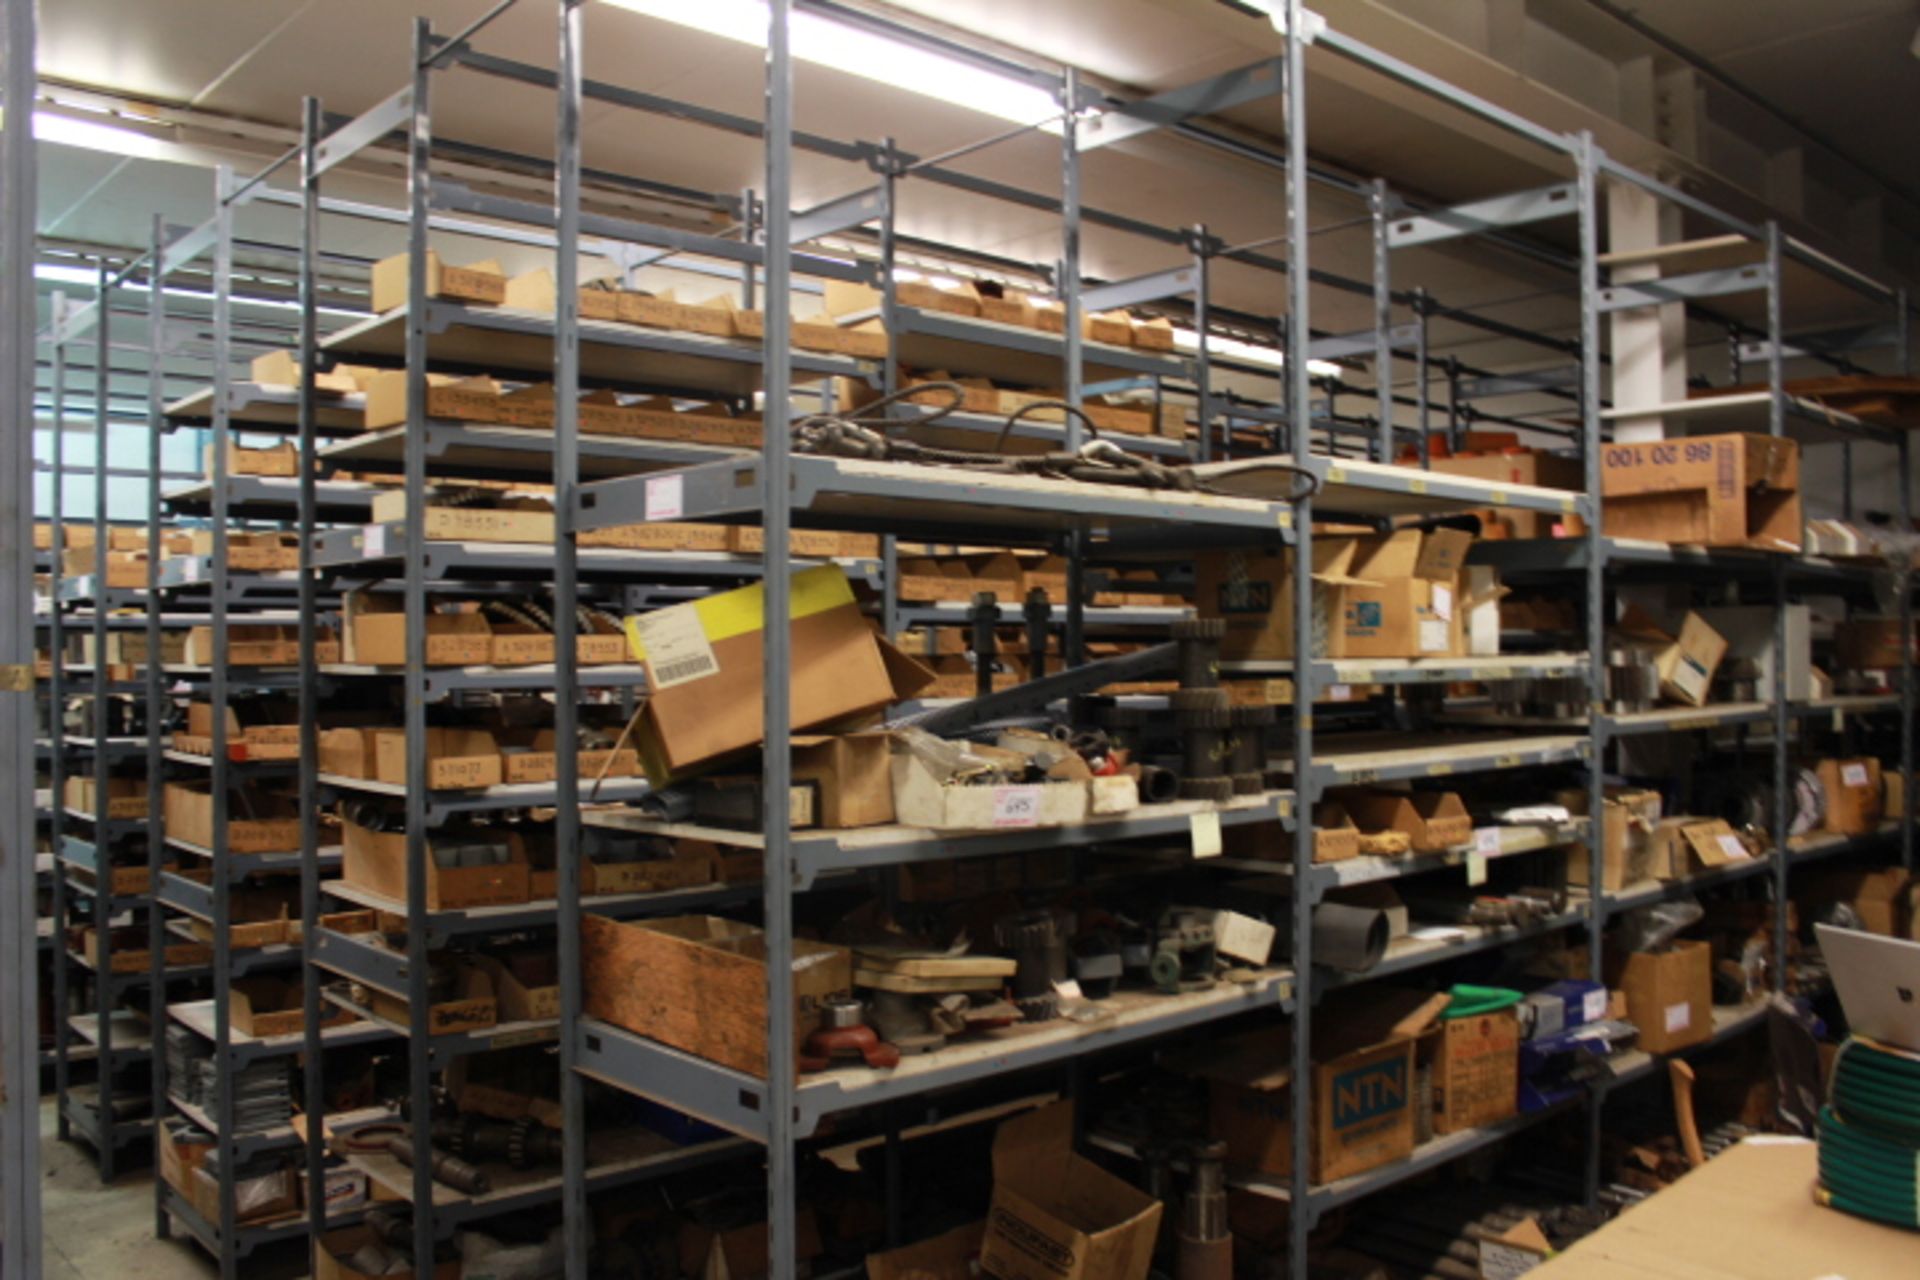 ROW OF 6 SECTIONS OF PARTS SHELVING, EACH 4'L X 2'D X 10'H